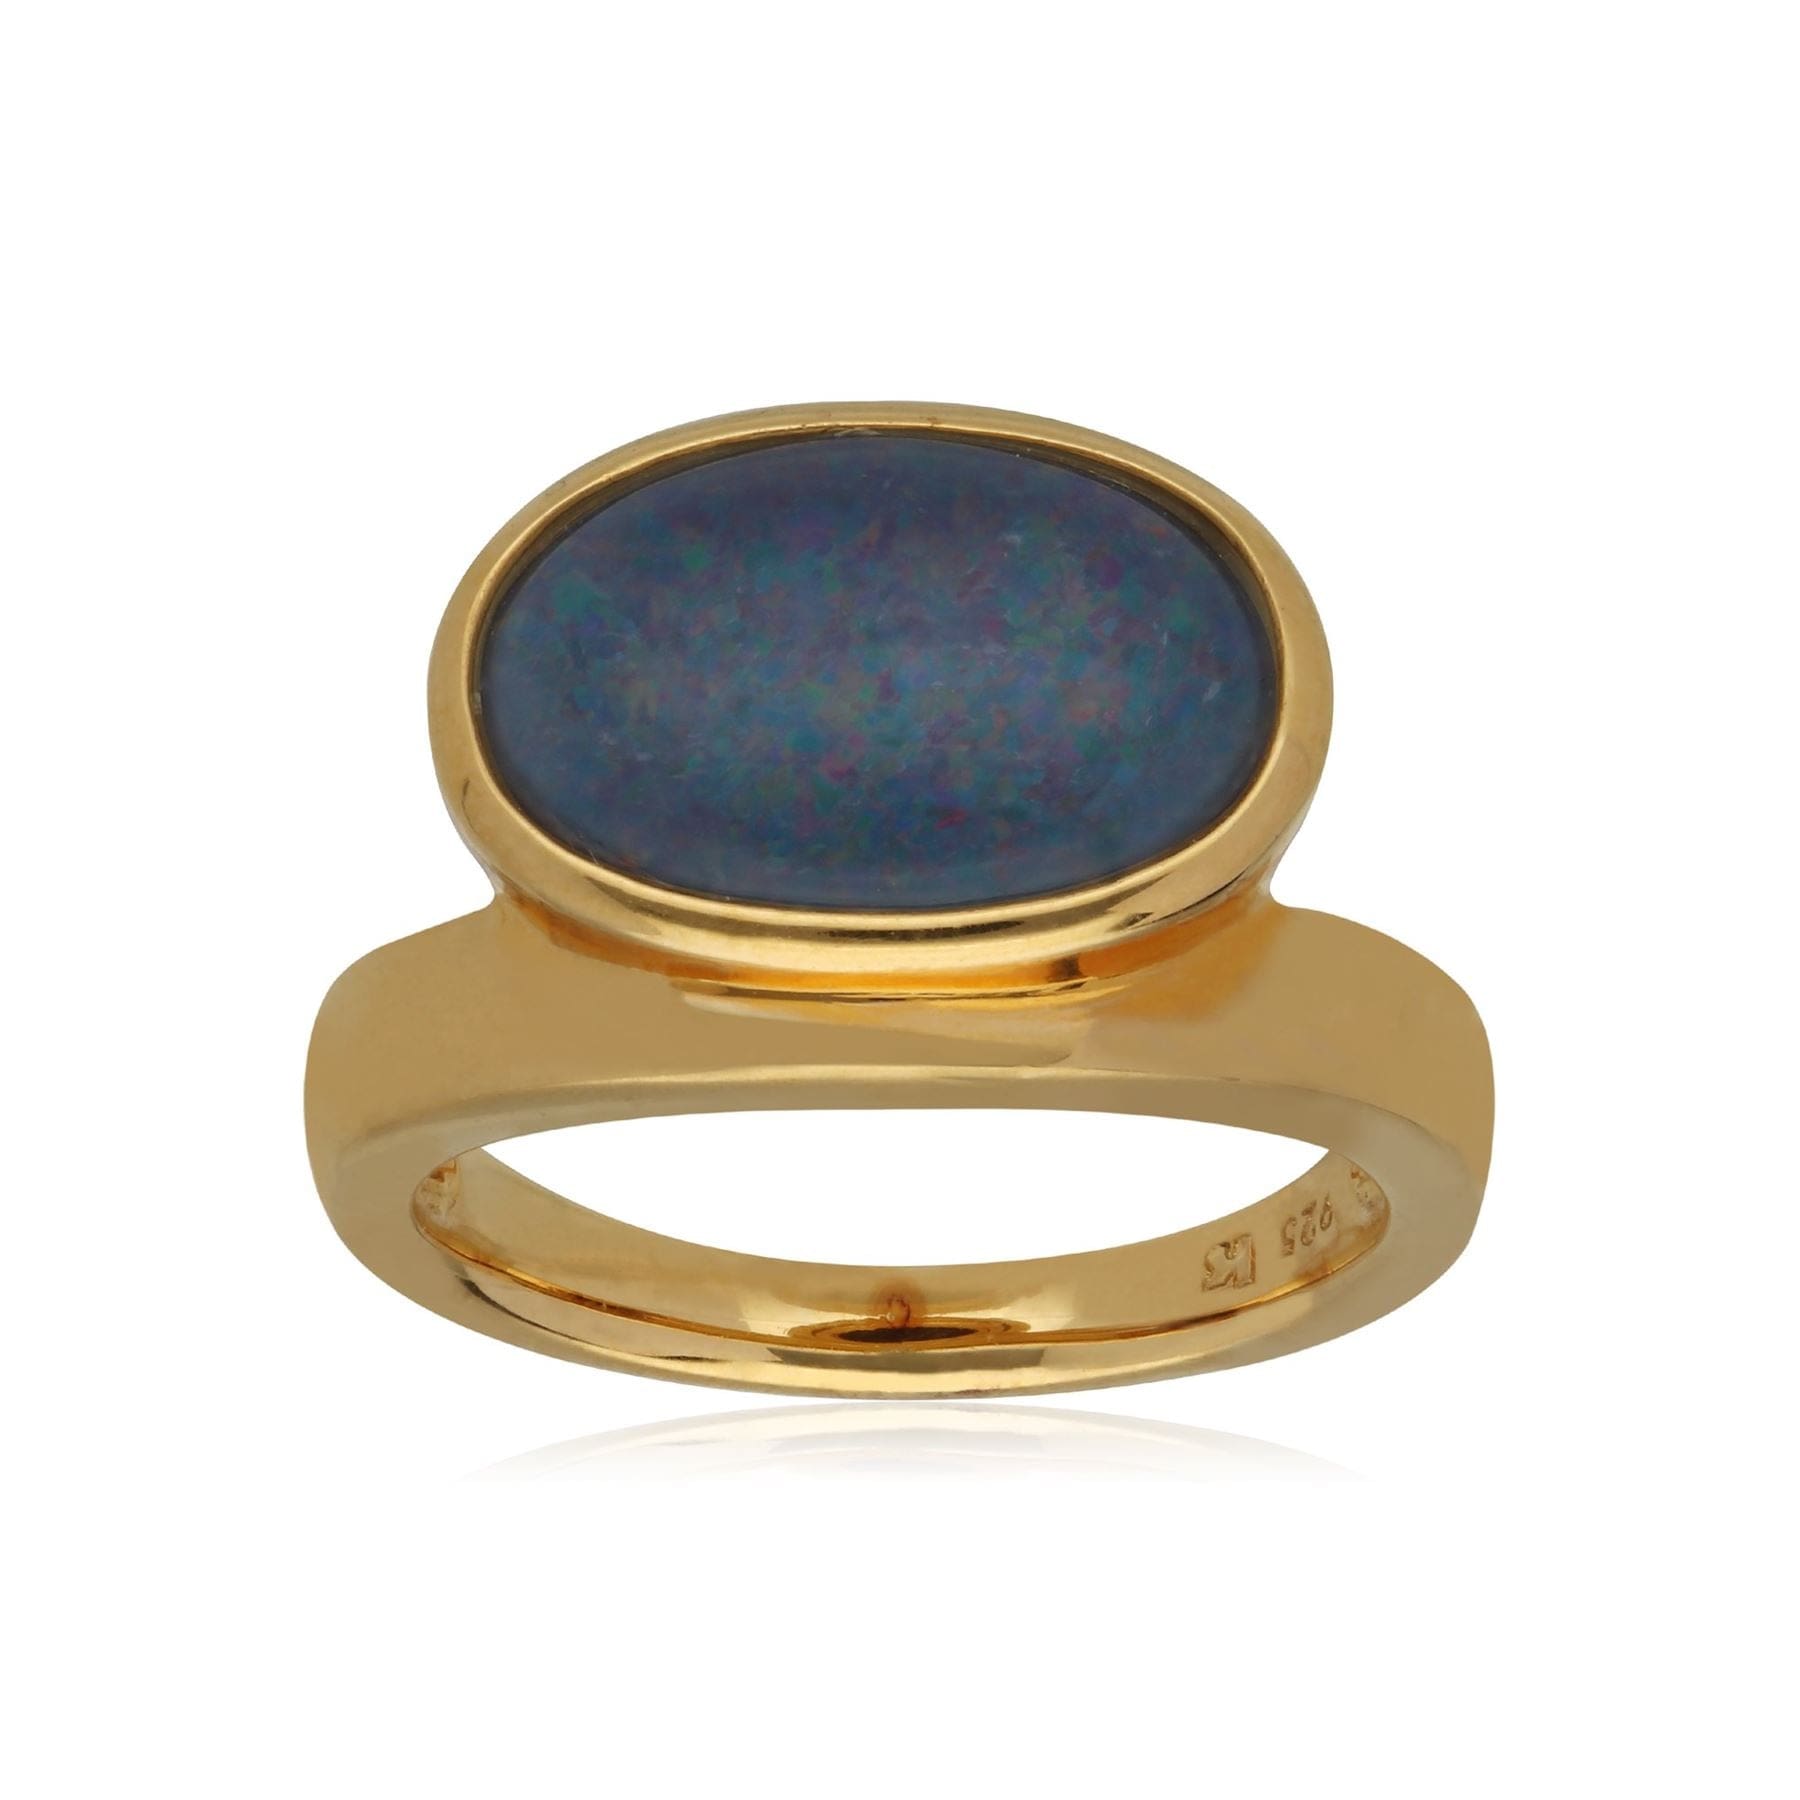 T0989R90W017 Kosmos Triplet Opal Cocktail Ring in Yellow Gold Plated Sterling Silver 1